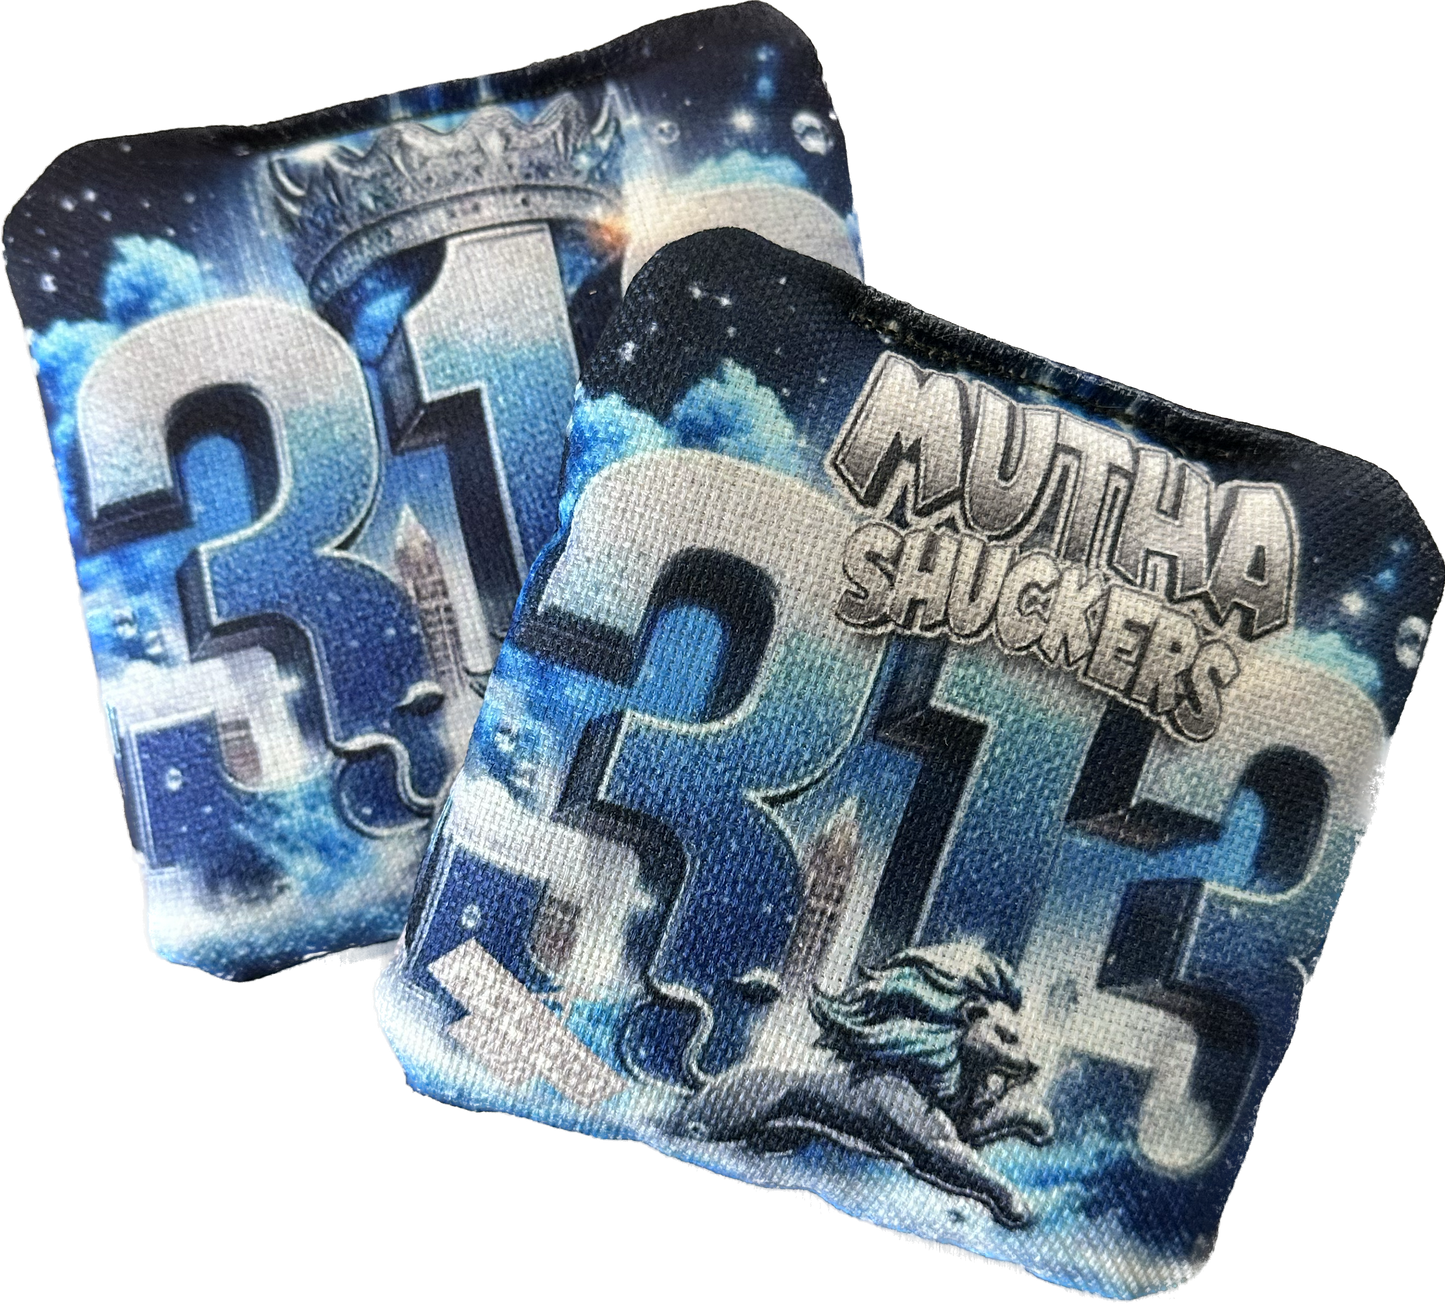 Mutha Shuckers Limited Edition 313 "Lions"